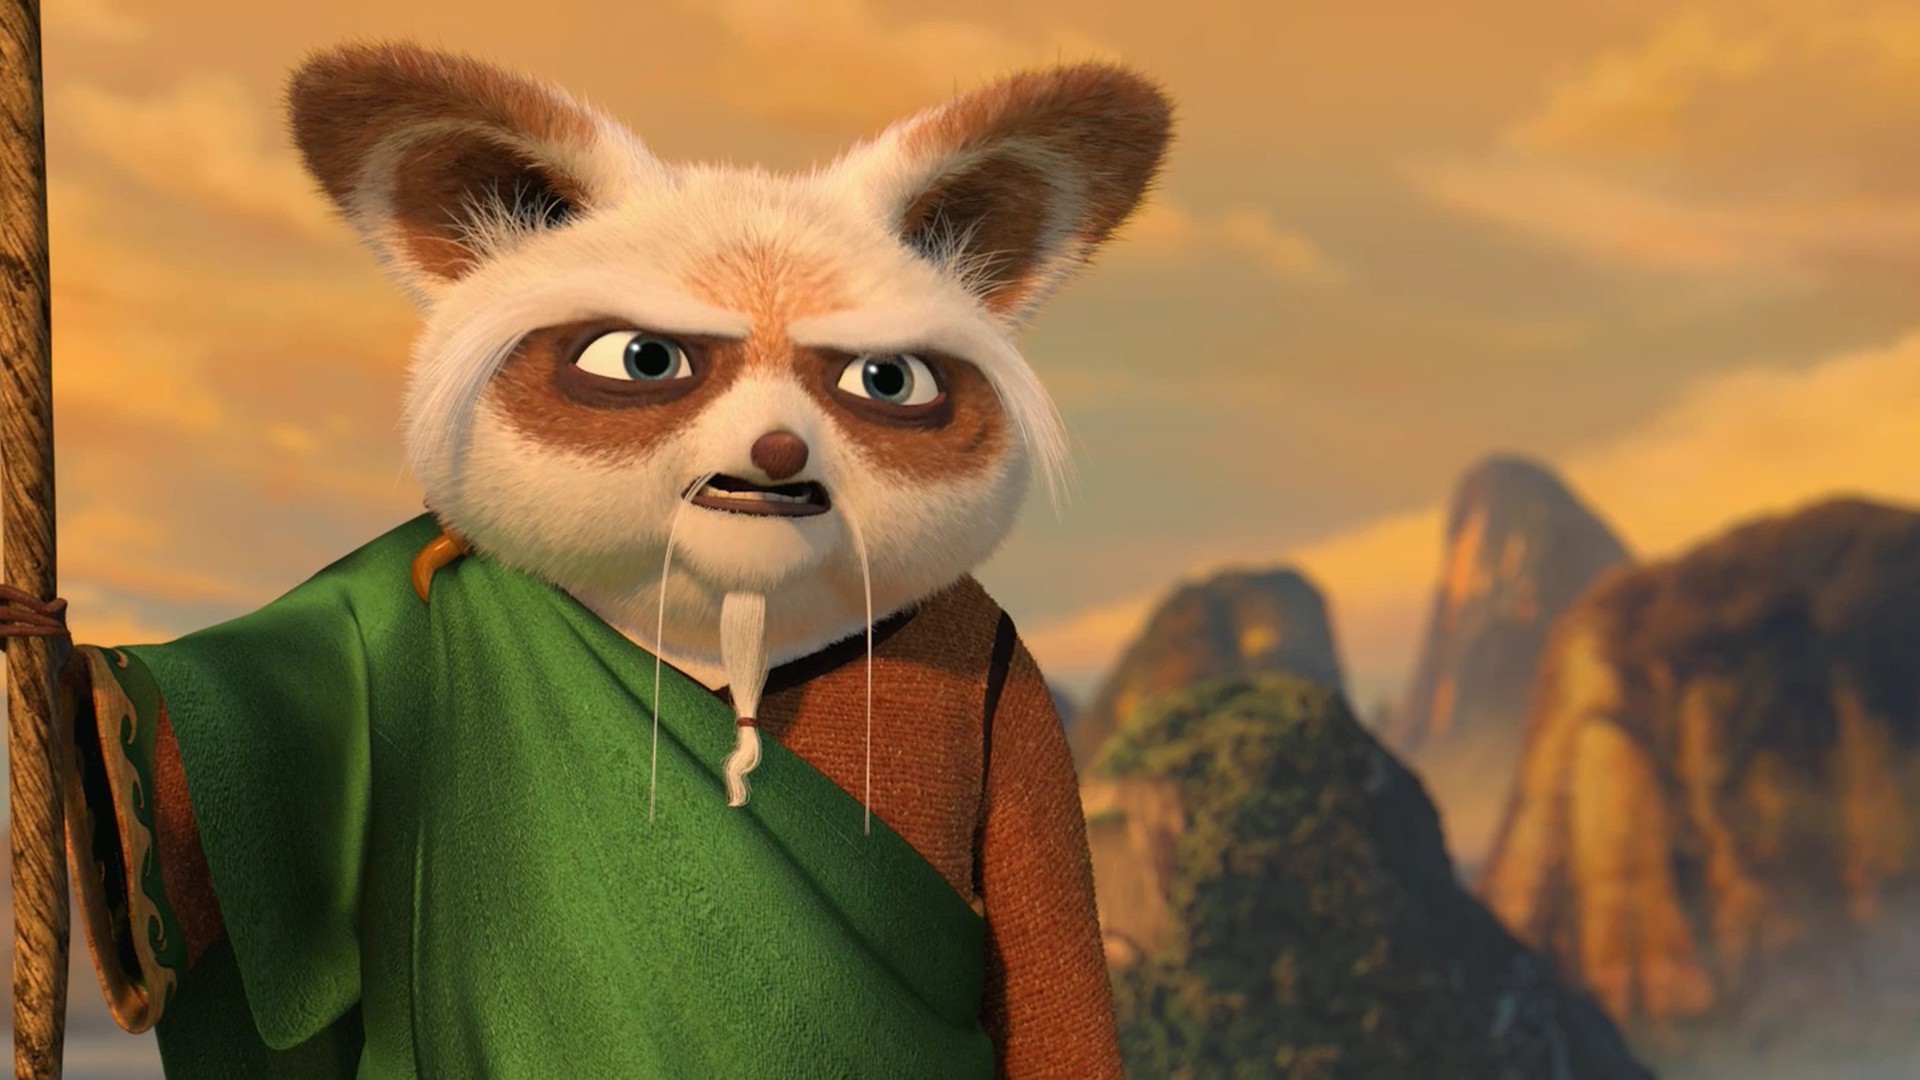 movies, Kung Fu Panda Wallpapers HD / Desktop and Mobile Backgrounds